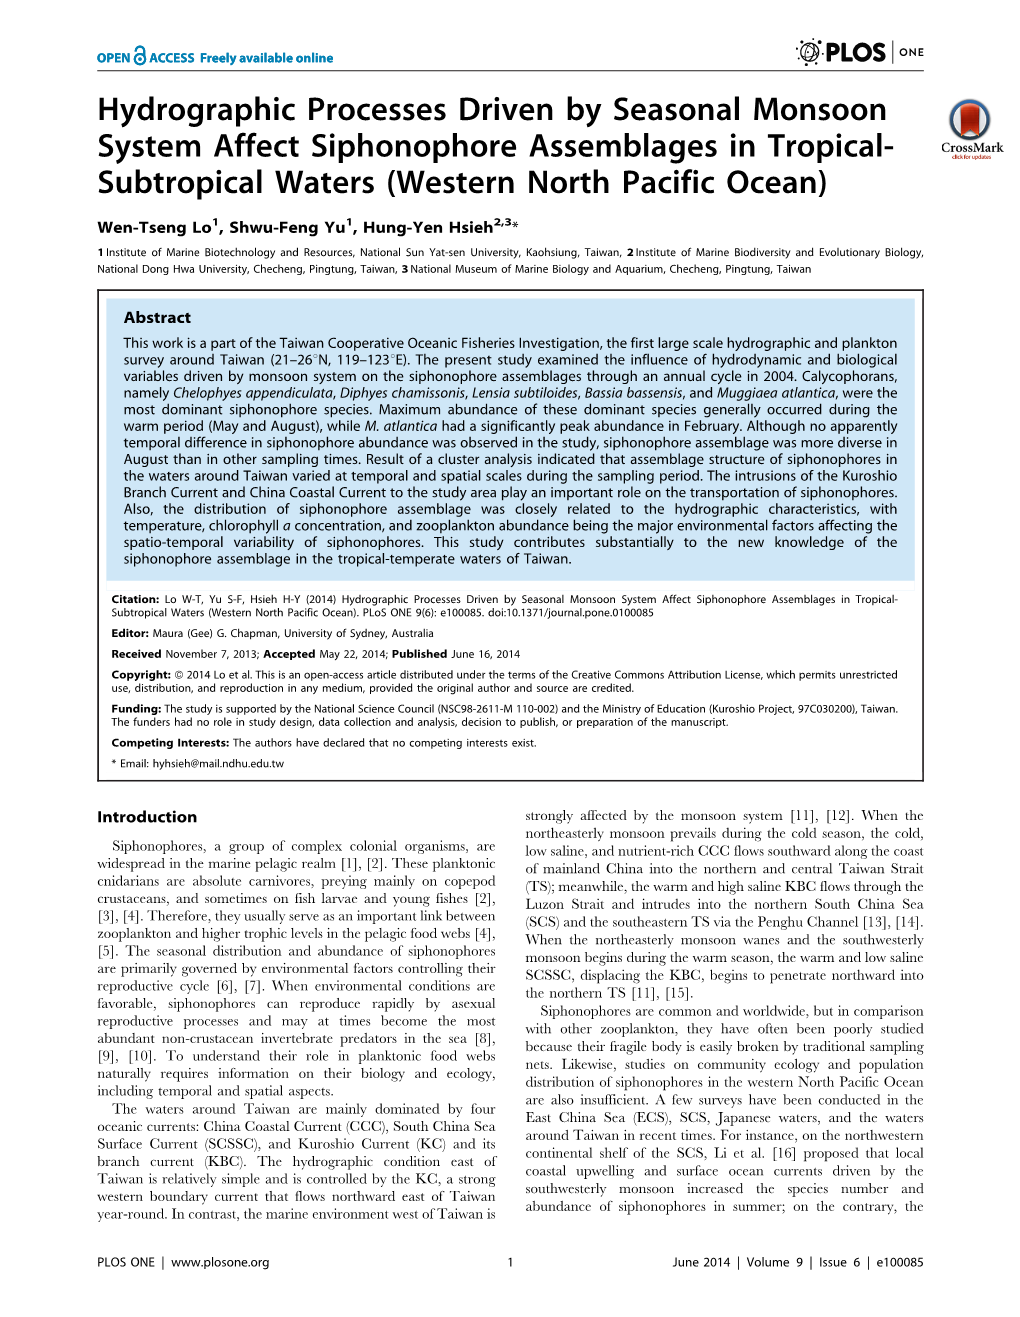 Hydrographic Processes Driven by Seasonal Monsoon System Affect Siphonophore Assemblages in Tropical- Subtropical Waters (Western North Pacific Ocean)